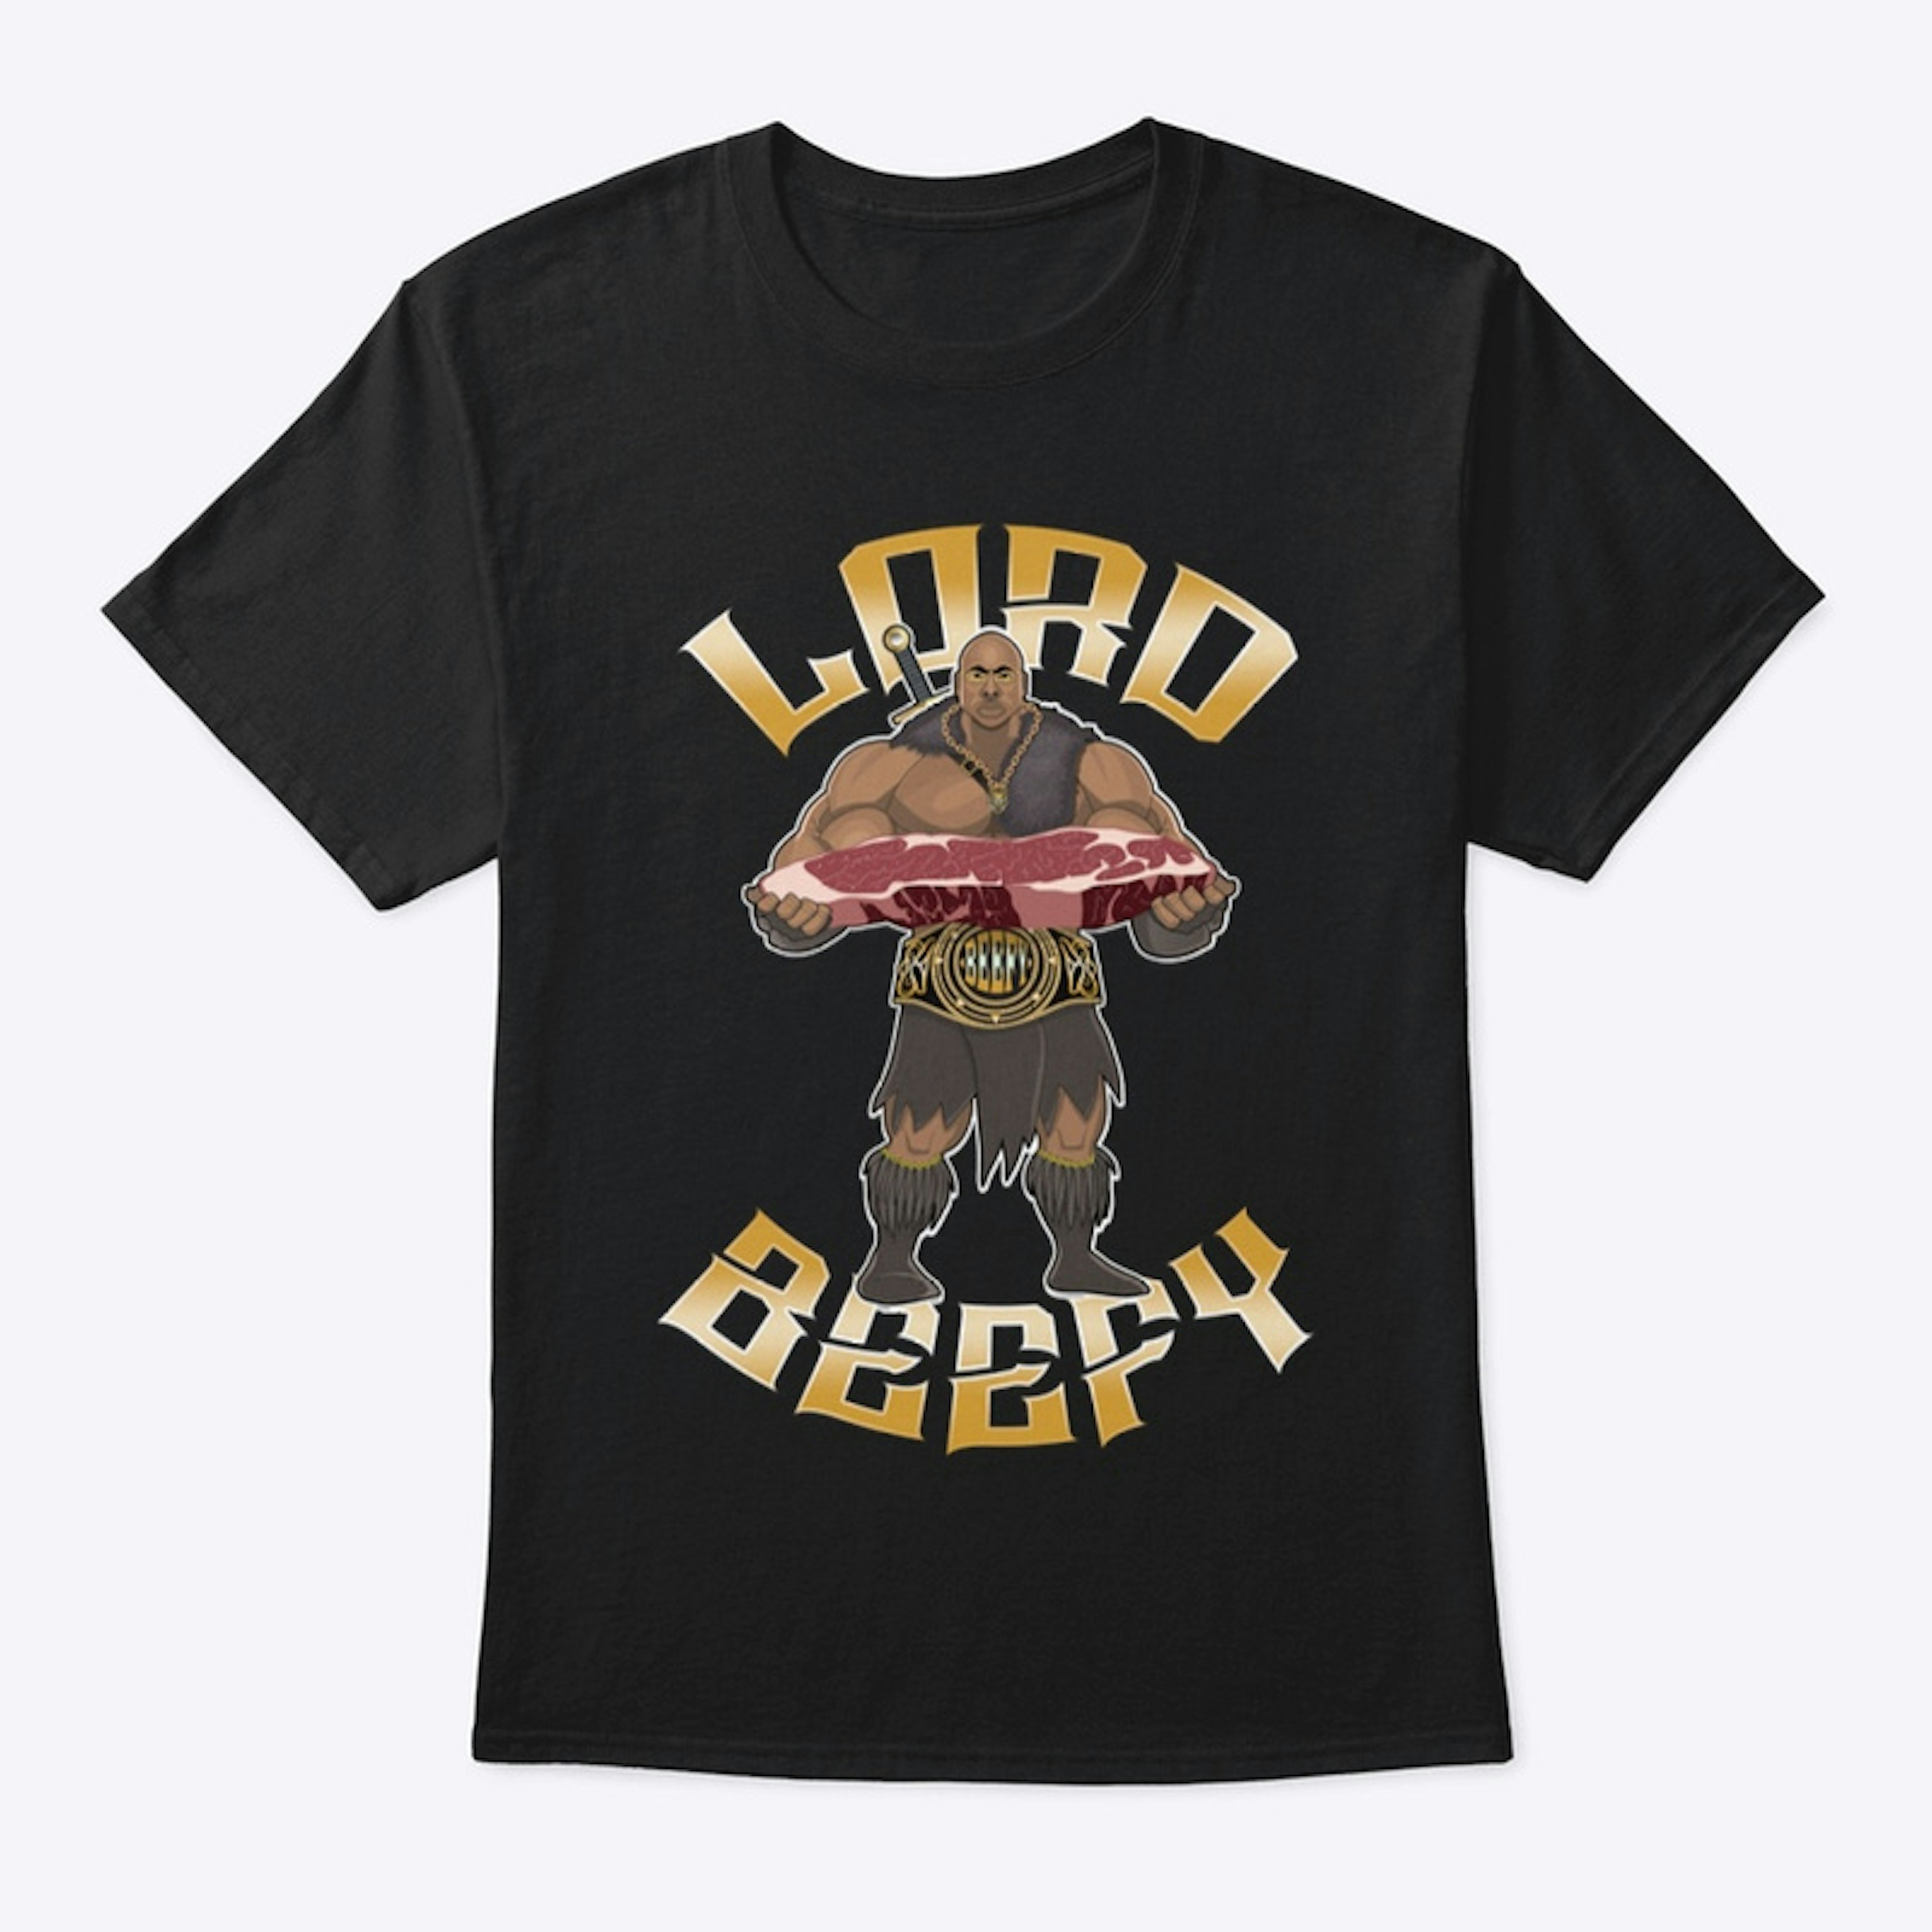 ILP presents LORD BEEFY